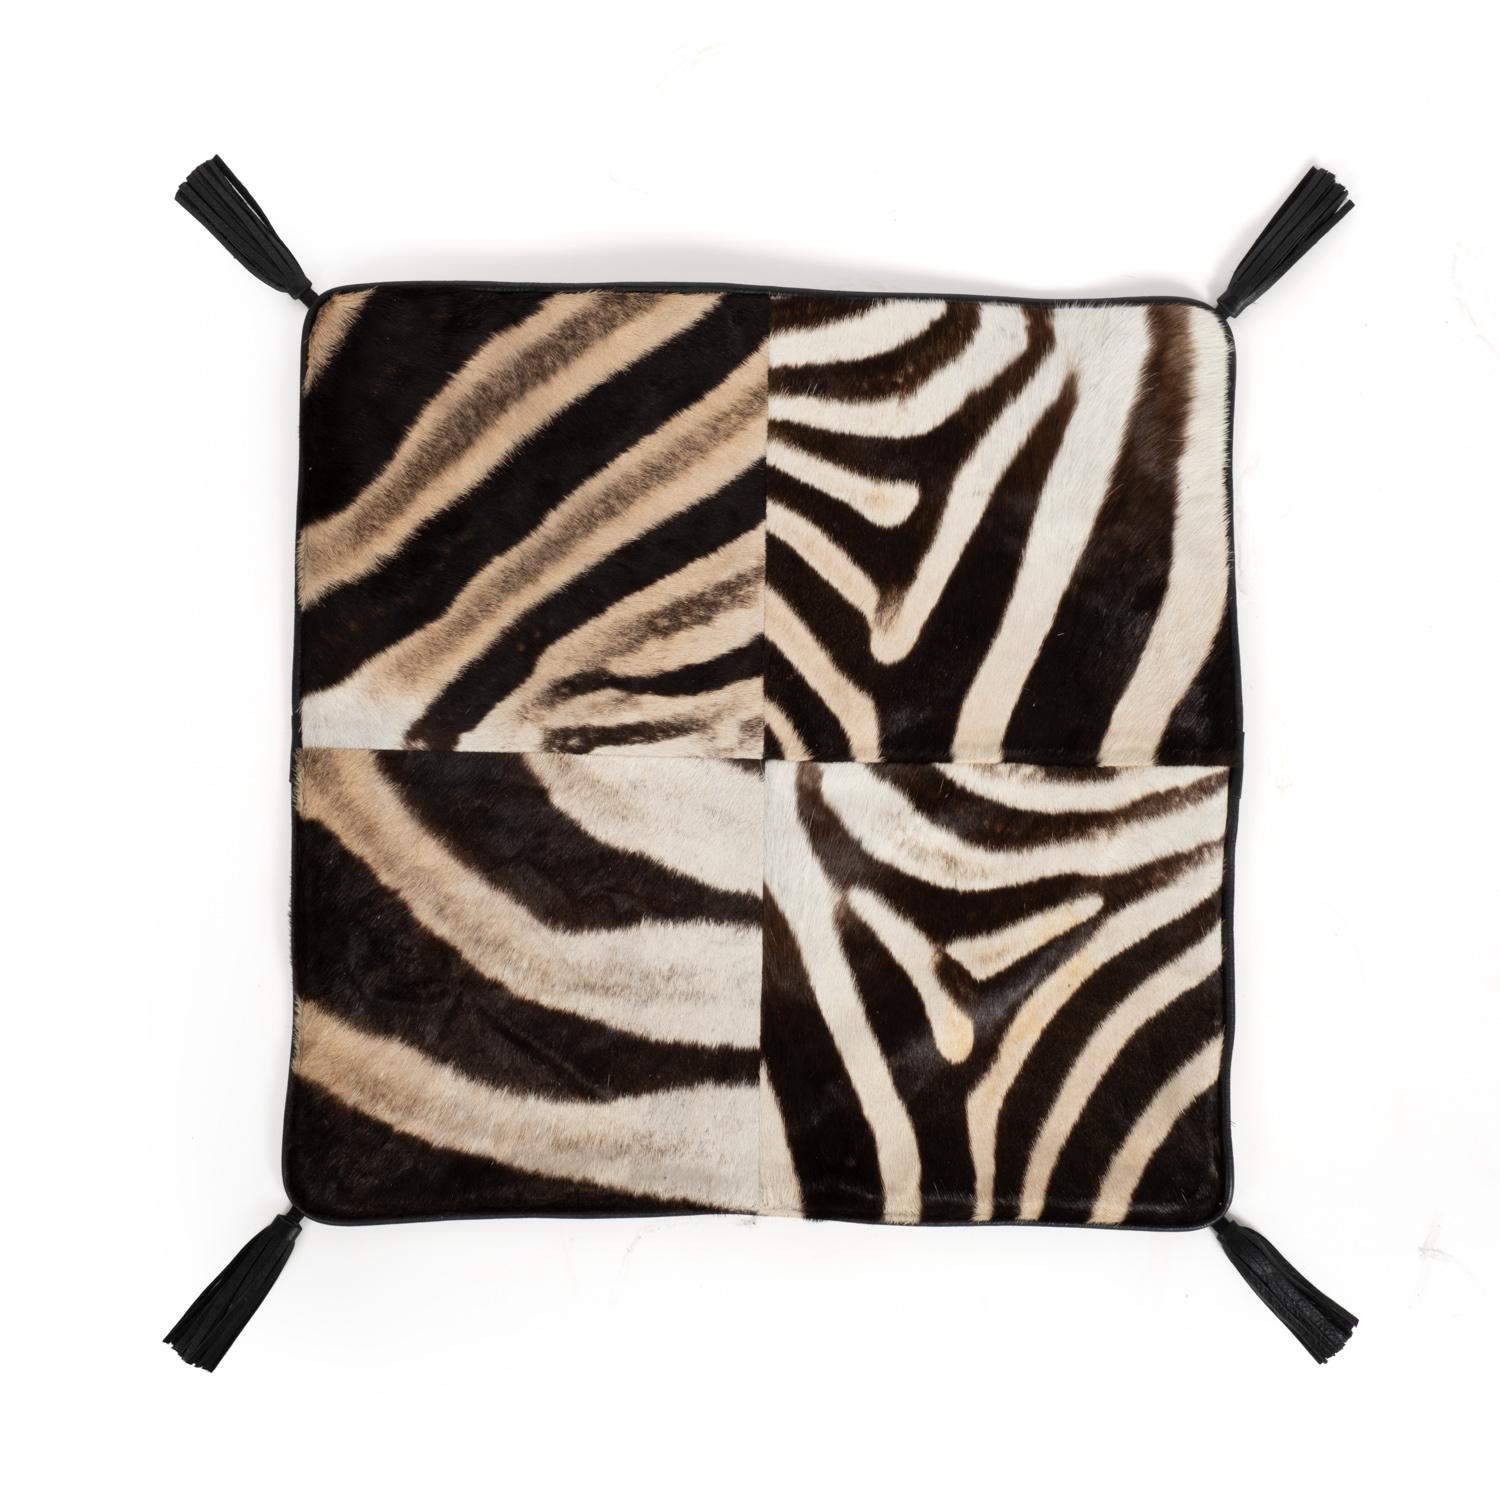 Effortlessly blending textures and natural materials, this pillow is handcrafted of ethically and sustainably sourced Zebra Hide with solid natural linen fabric on the reverse. A feather-and-down insert ensures long-lasting comfort. Due to the use